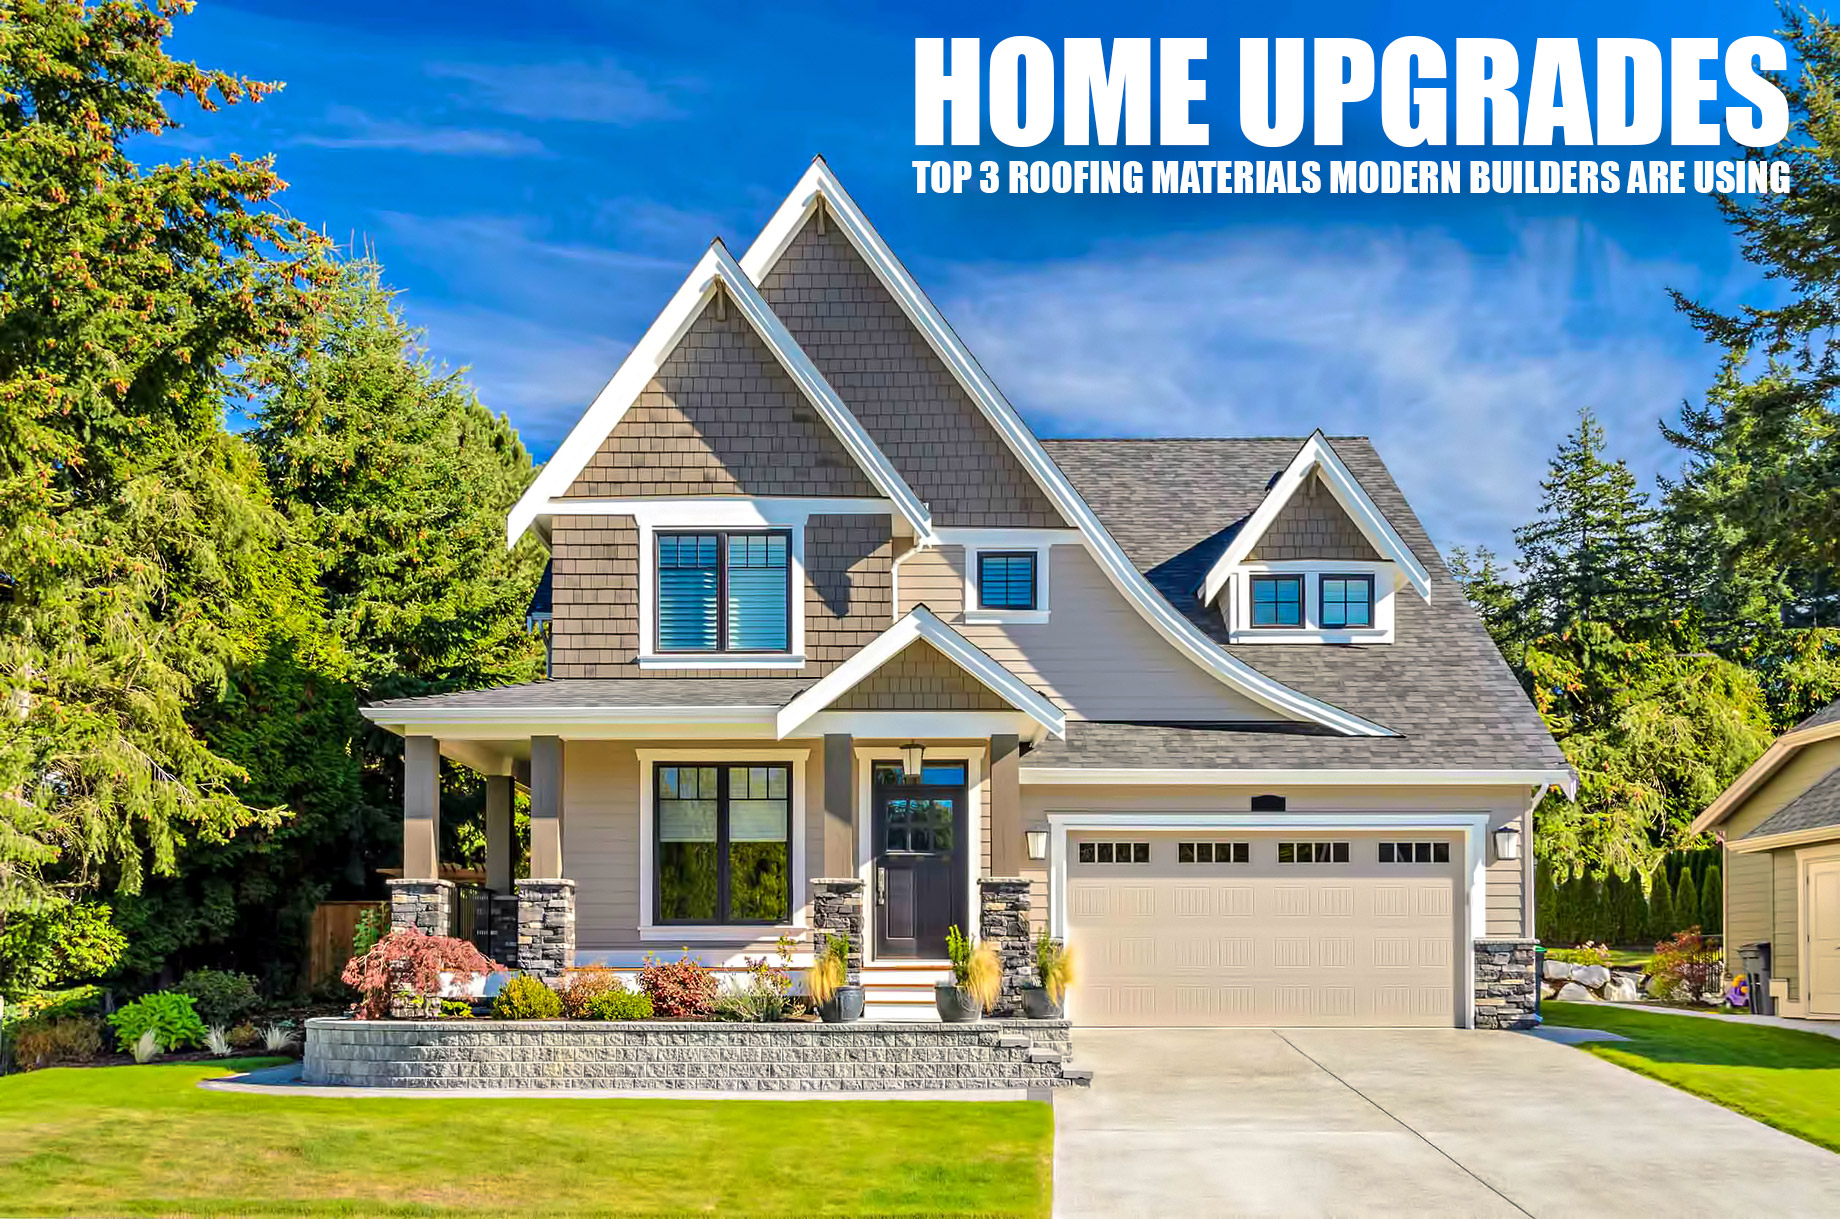 Home Upgrades - Top 3 Roofing Materials Modern Builders Are Using